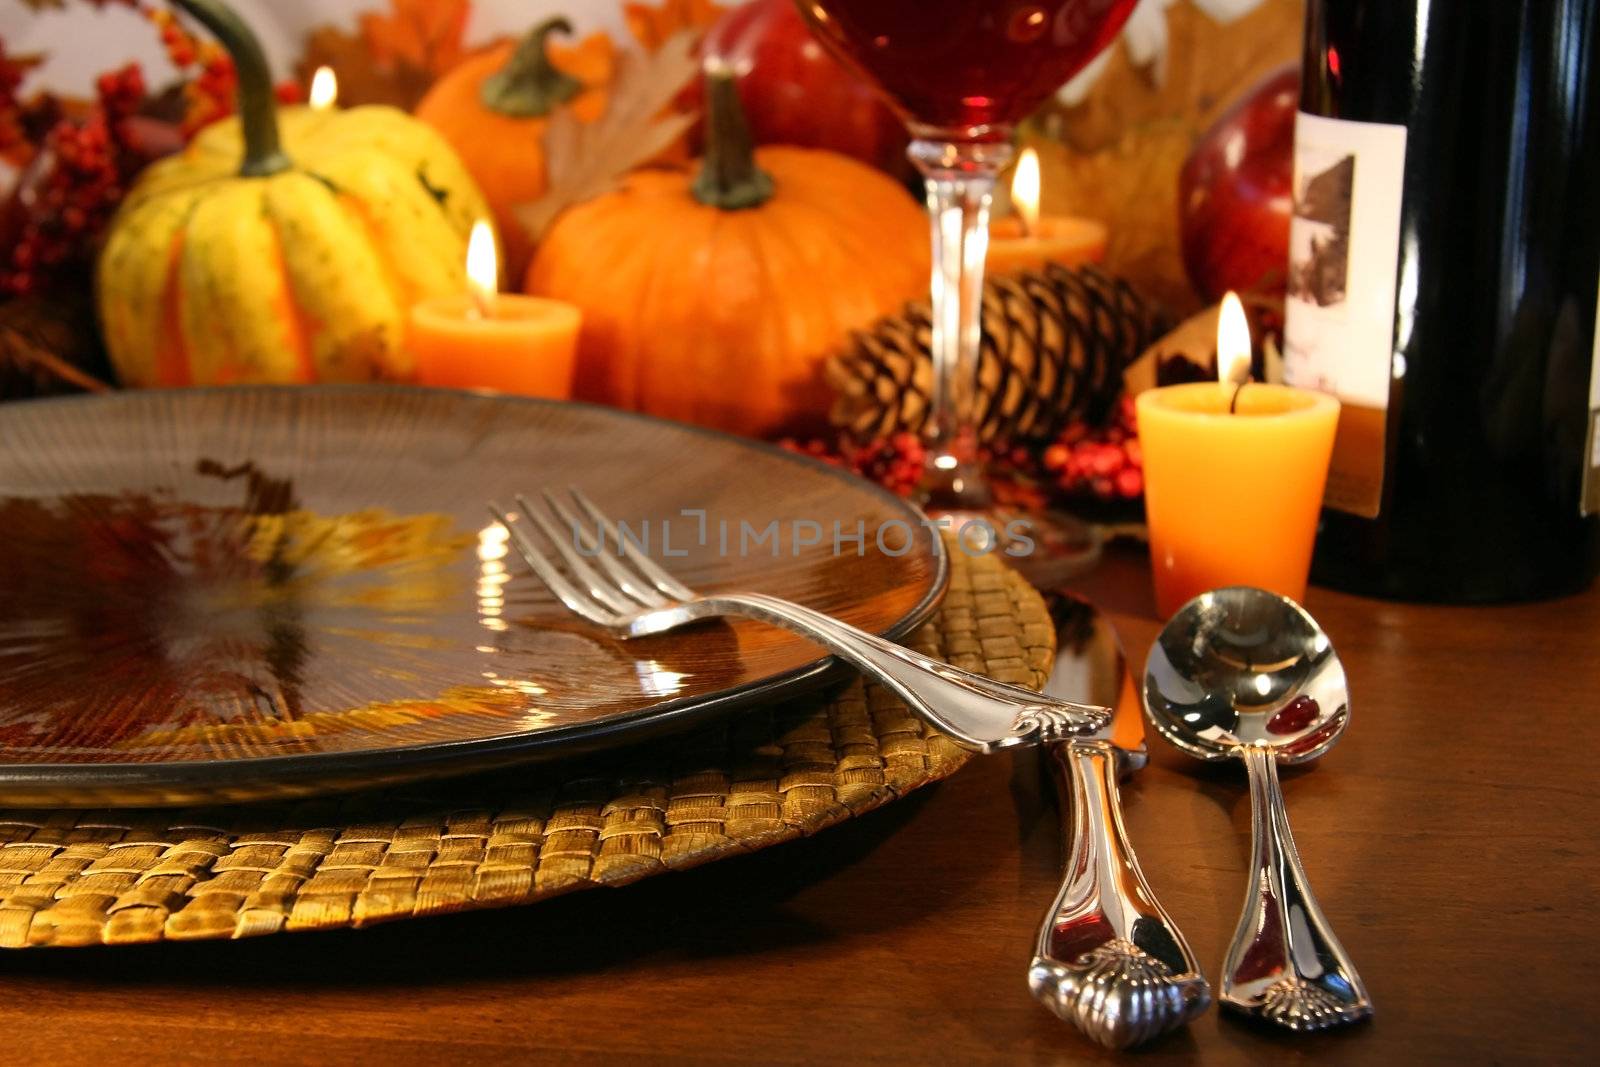 Table set for Thanksgiving